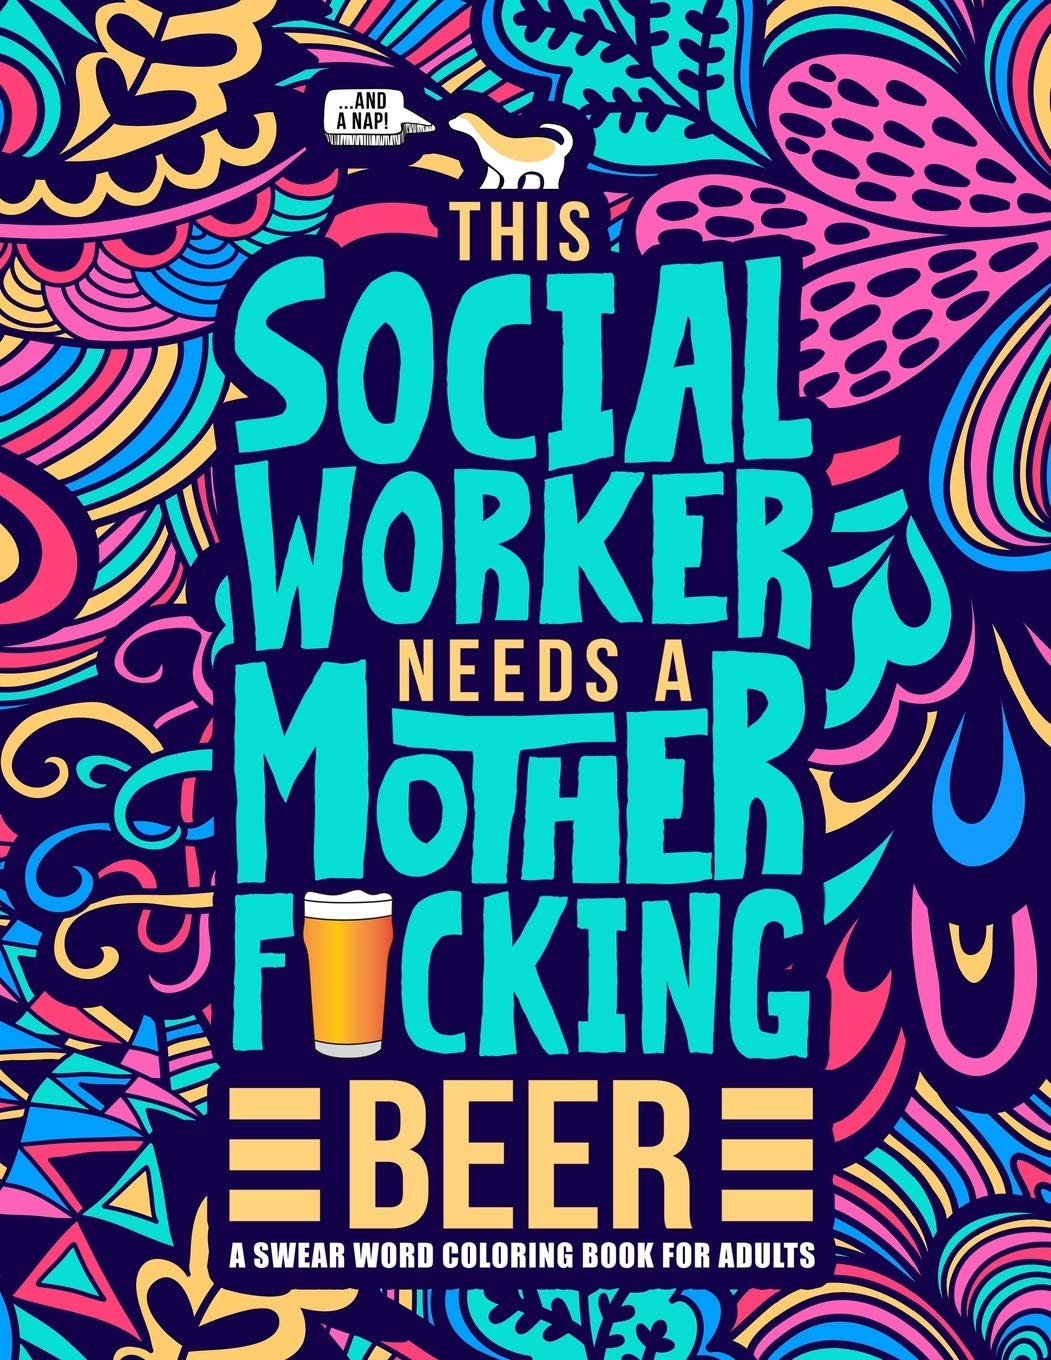 This Social Worker Needs a Mother F*cking Beer: A Swear Word Coloring Book for Adults: A Funny Adult Coloring Book for Social Workers & Social Work Students for Stress Relief